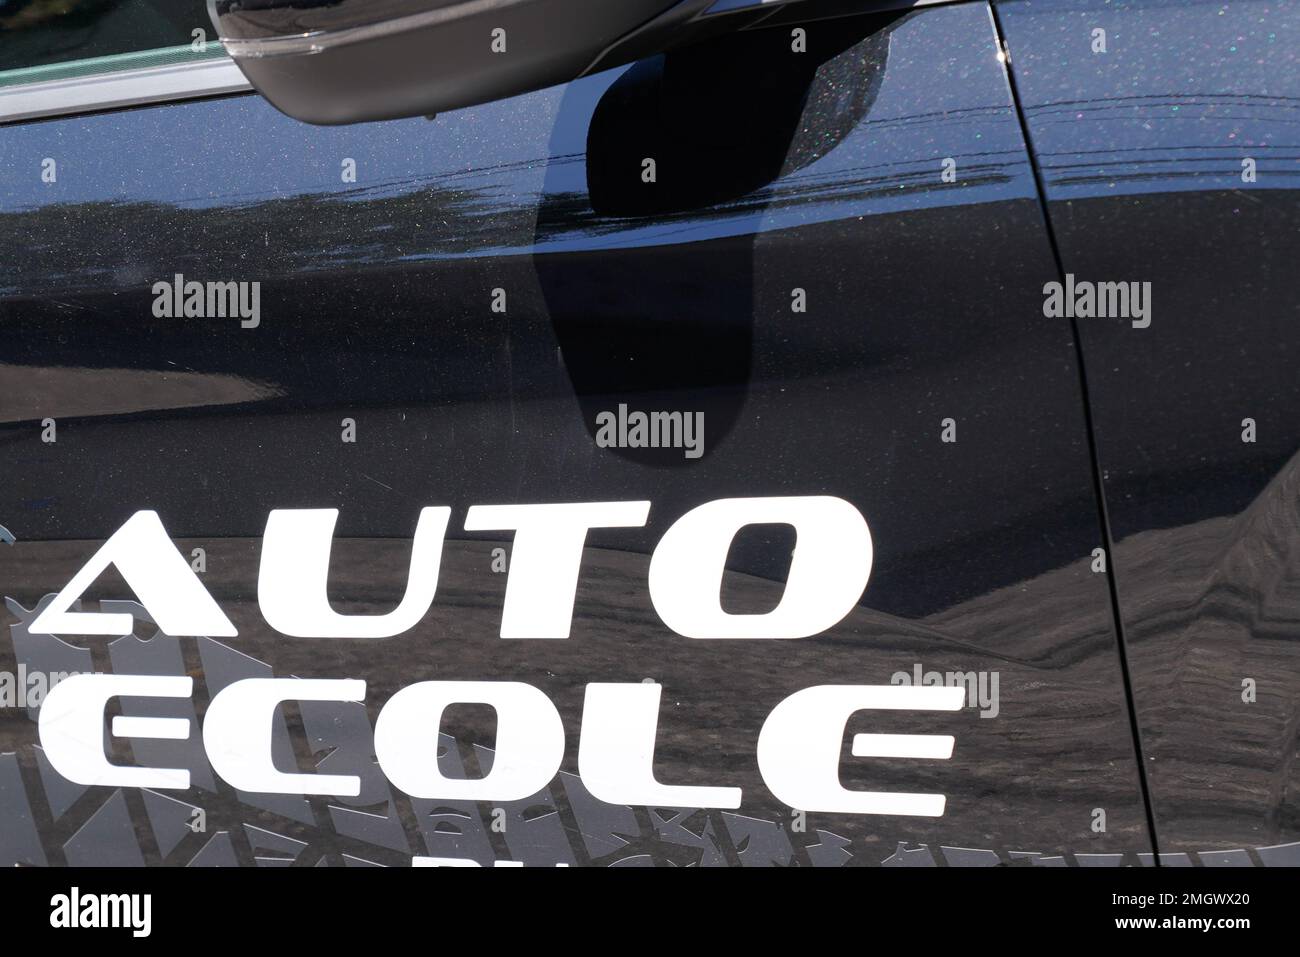 auto ecole text in french means driving school sign write on education learning car side door Stock Photo